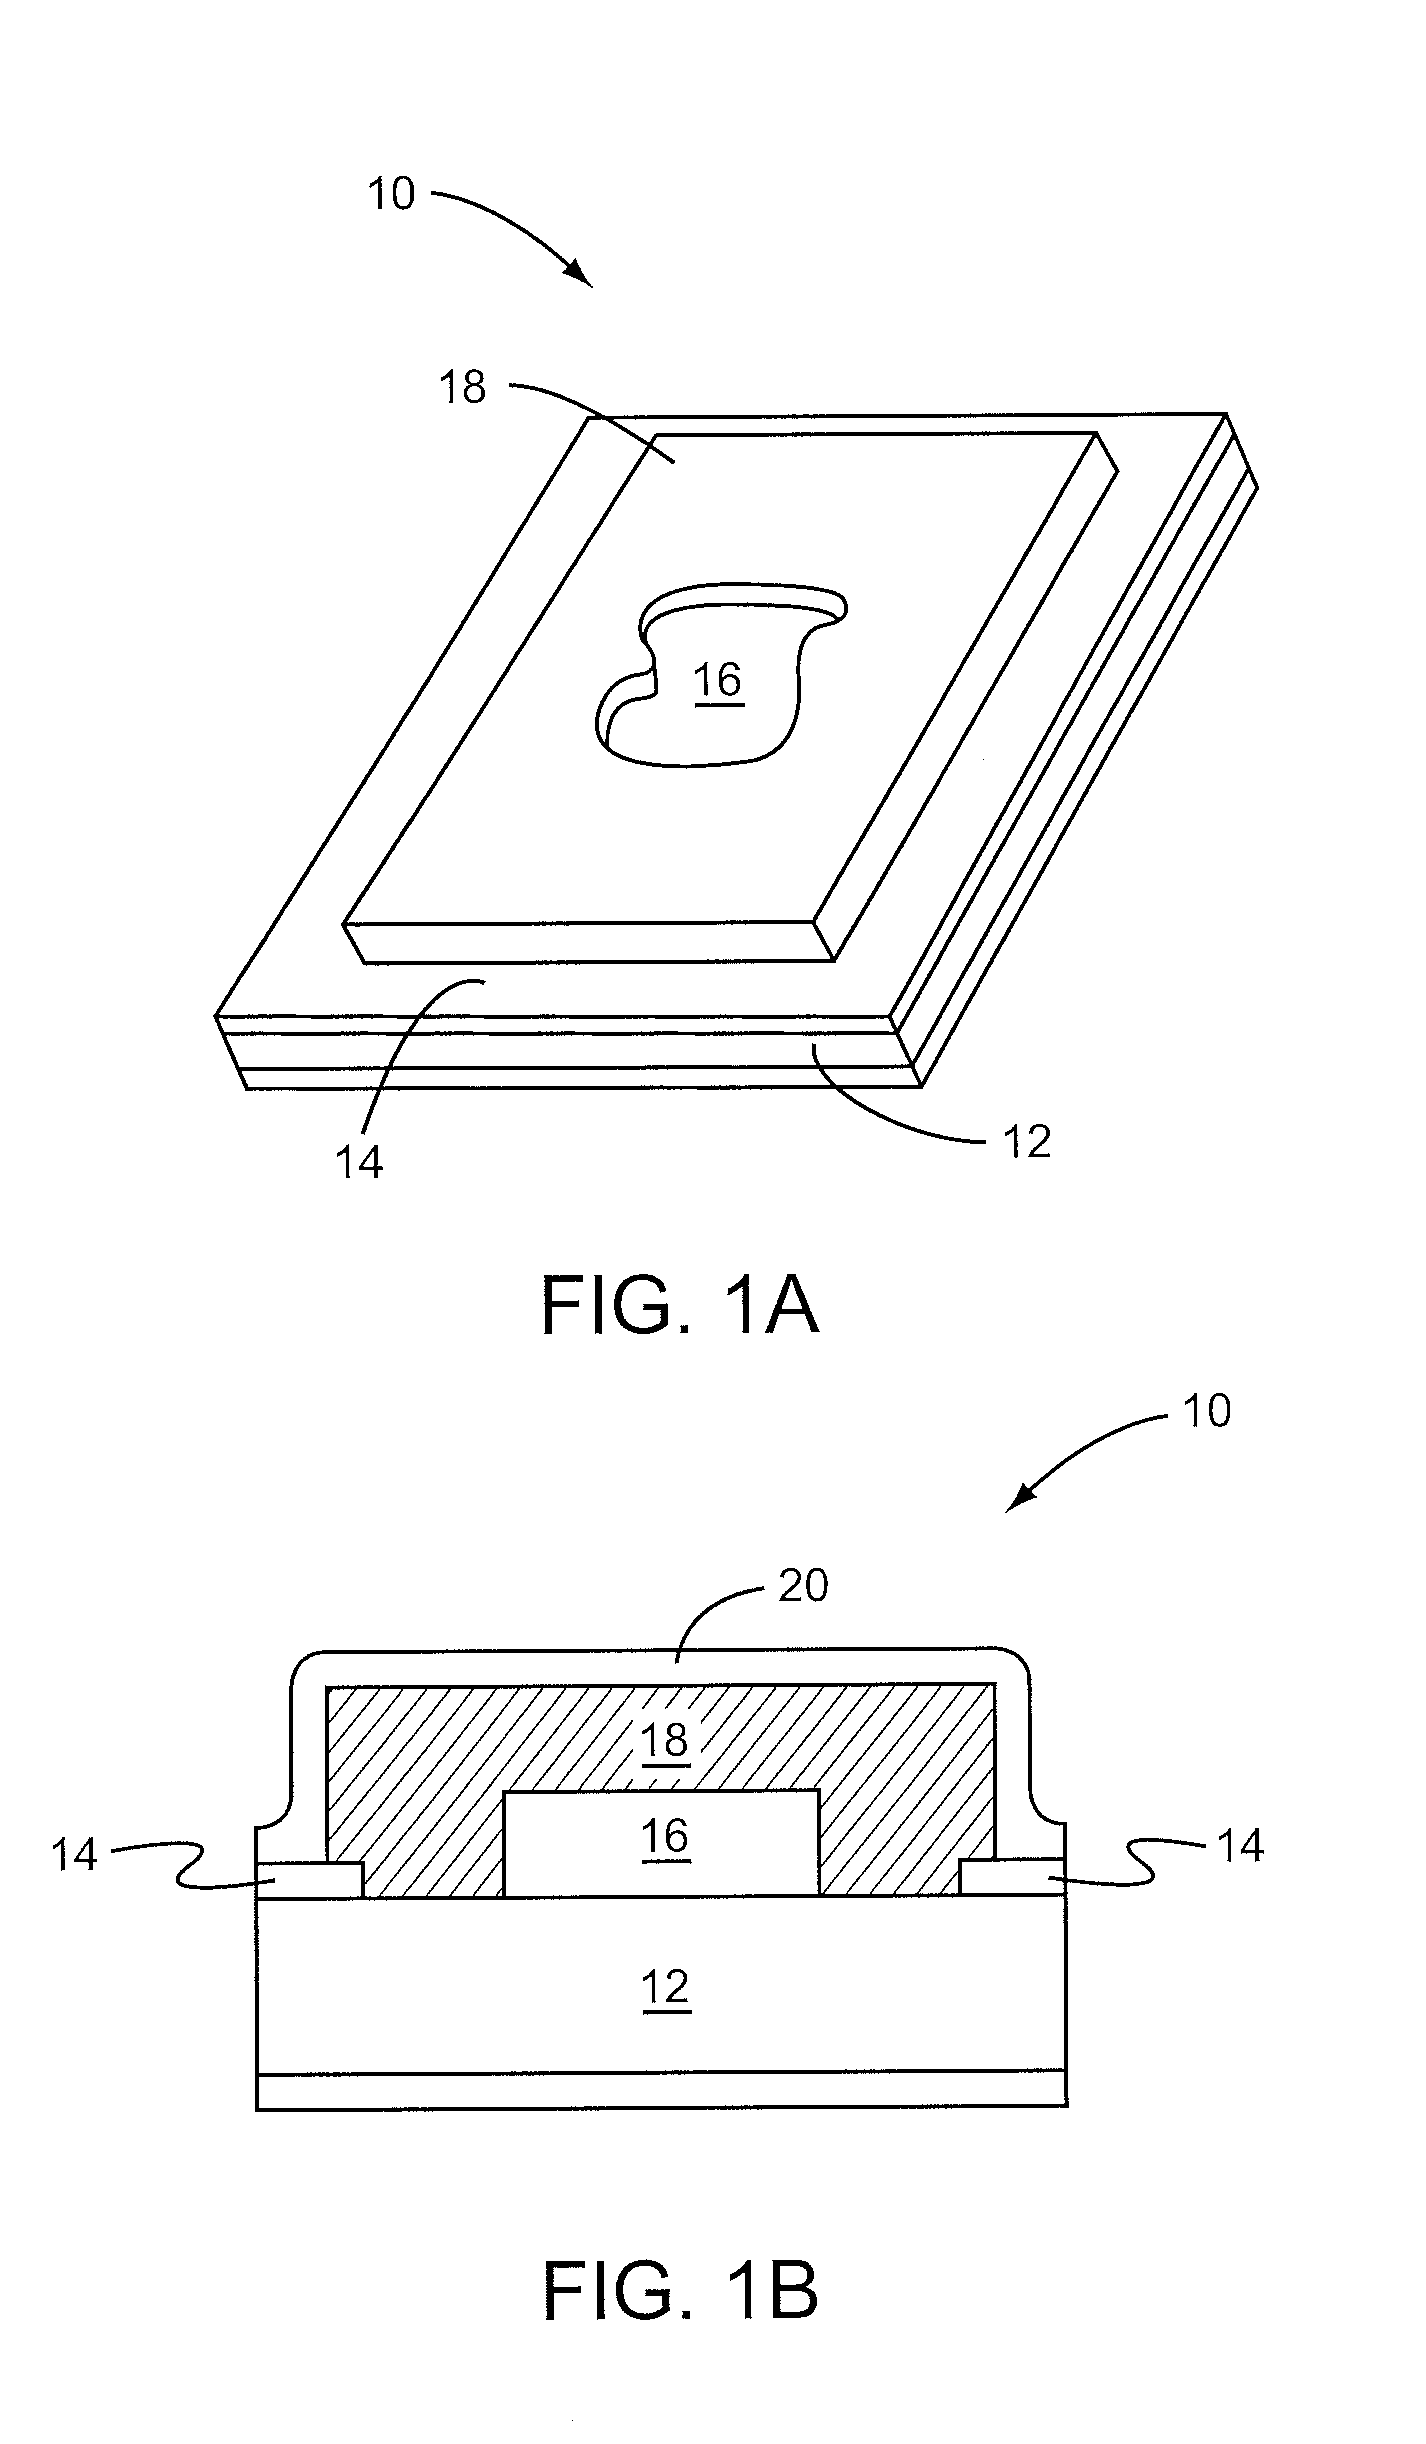 Bottom side support structure for conformal shielding process